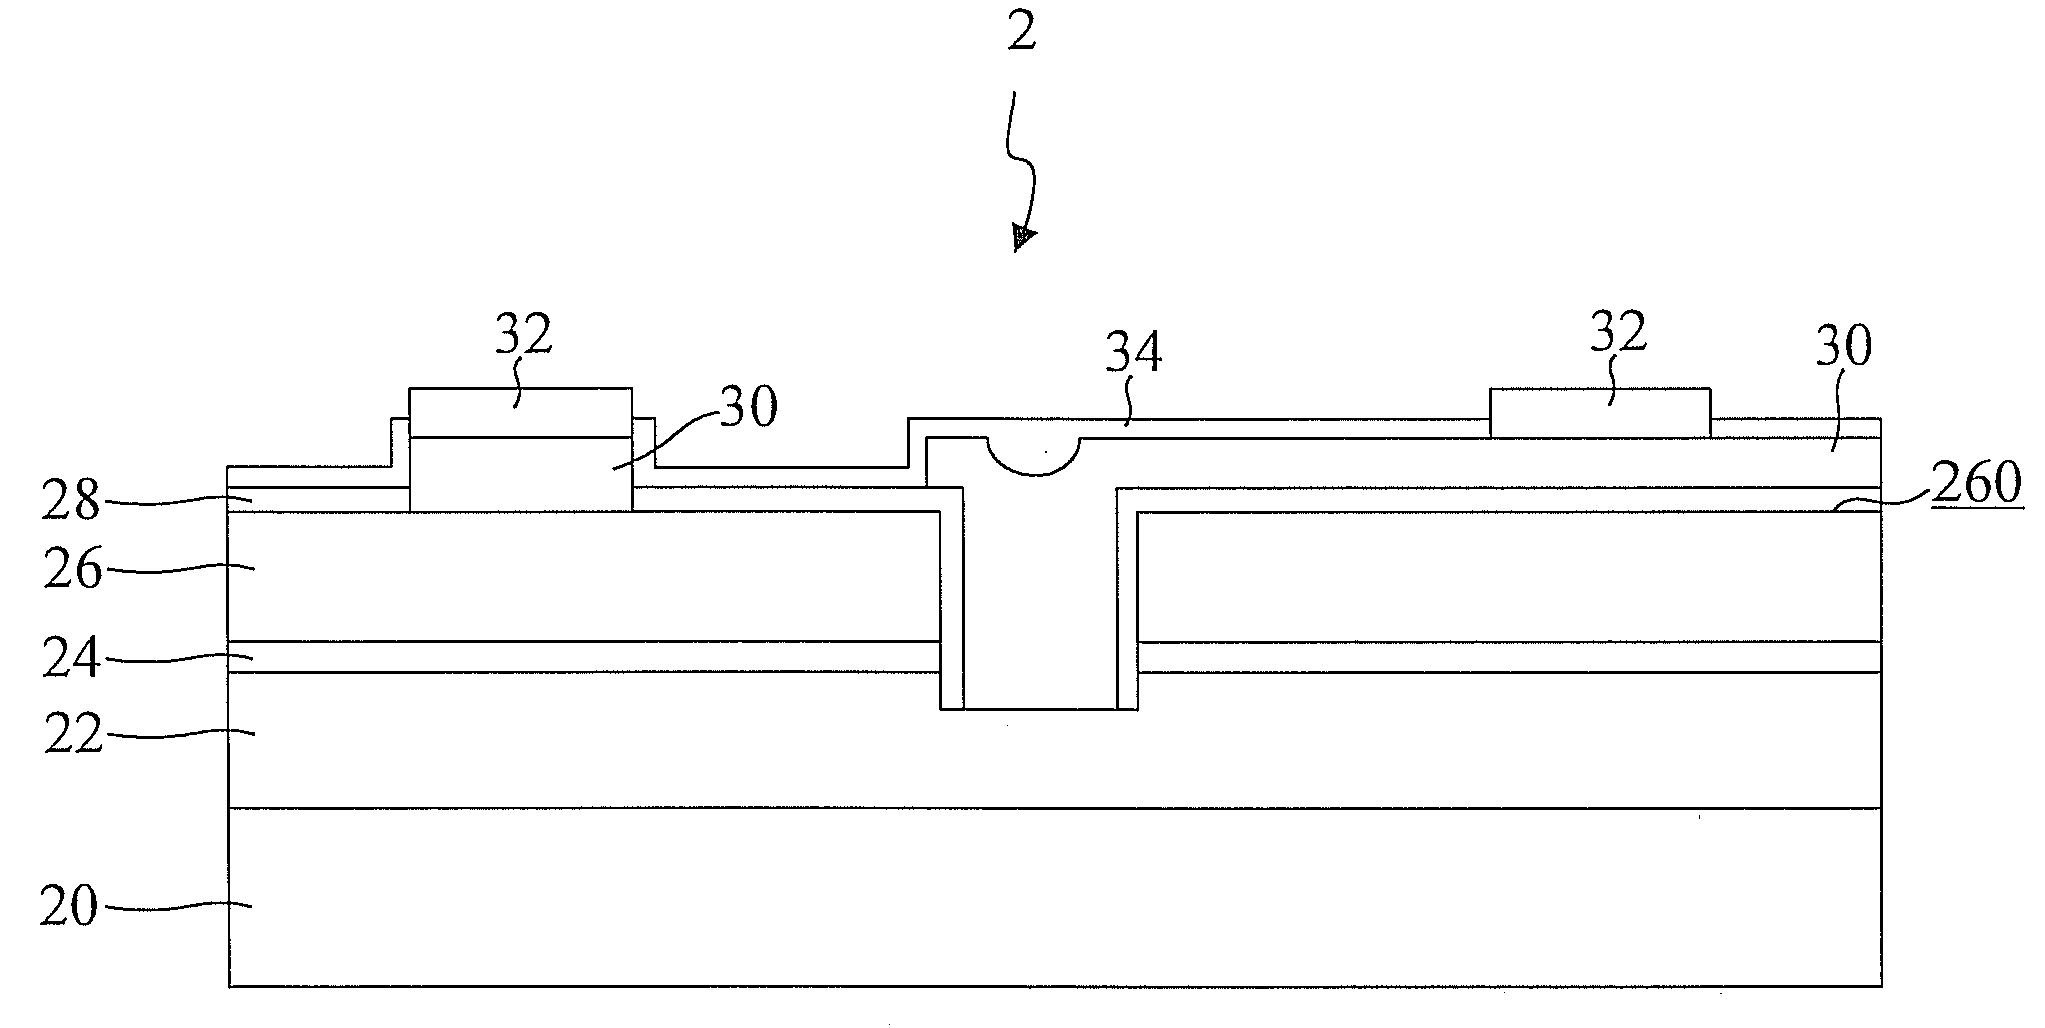 Semiconductor light-emitting device and method of fabricating the same